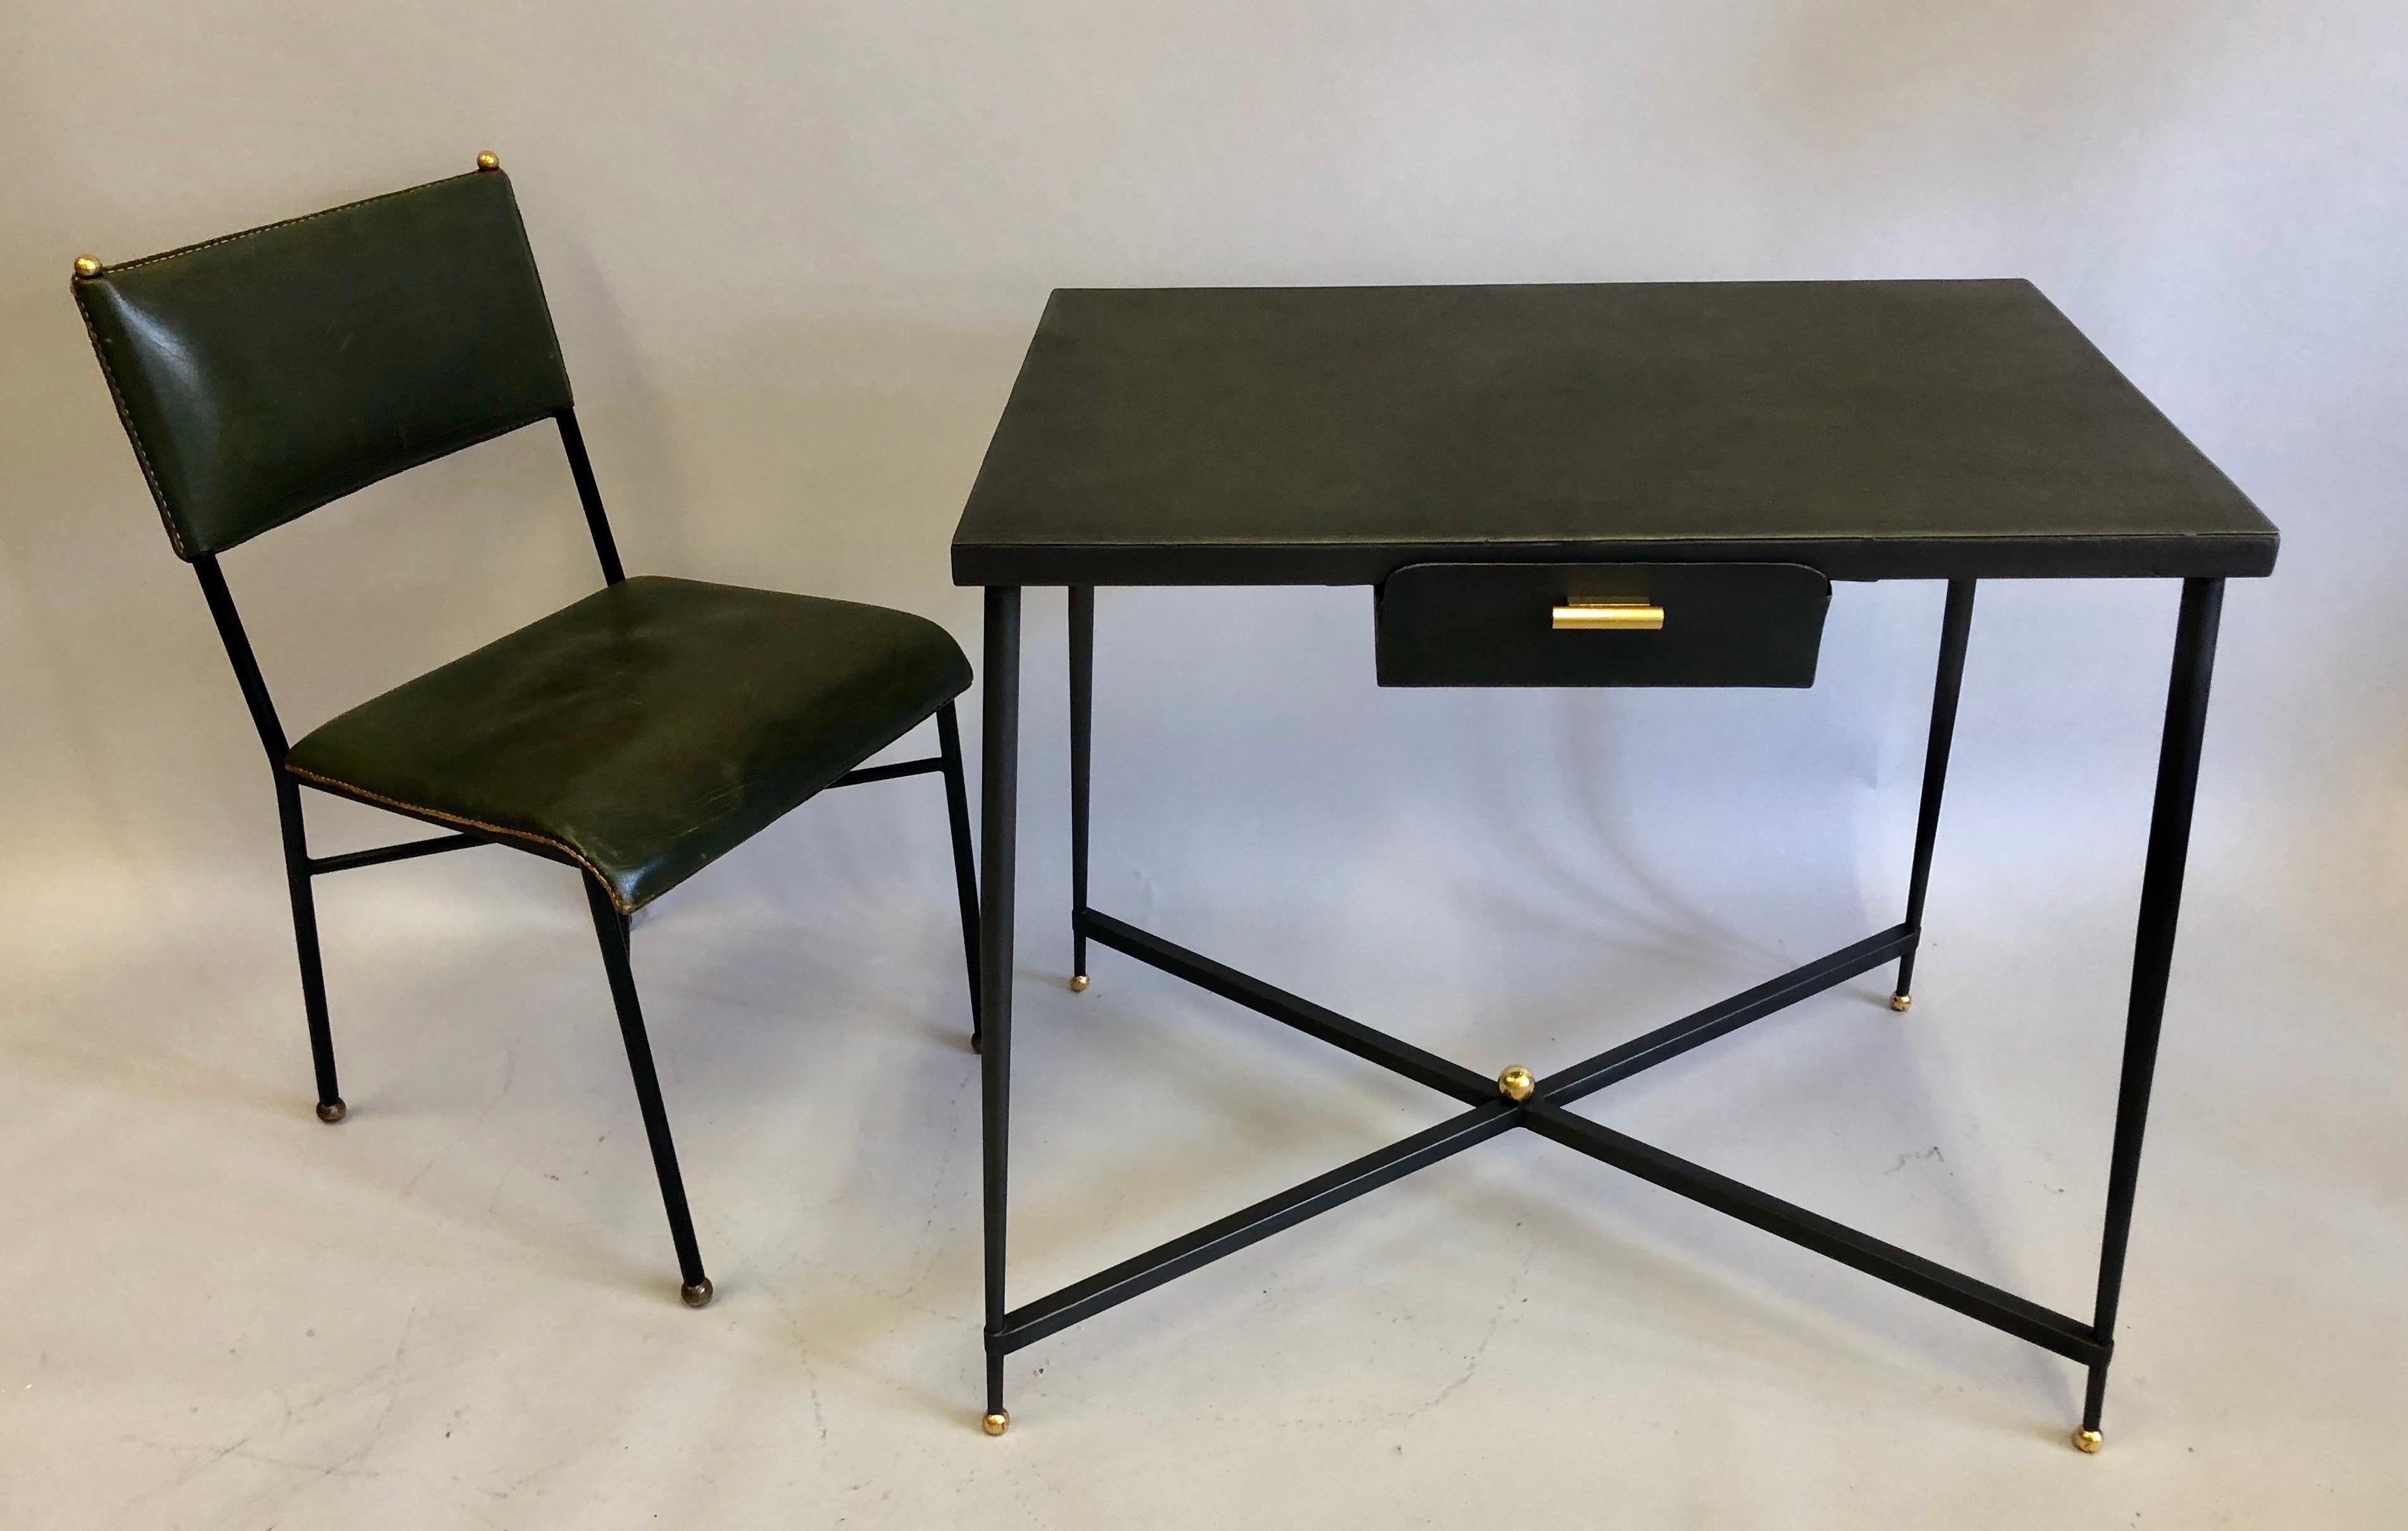 Sober, elegant, French modern Neoclassical desk or writing table in handwrought iron with iron pencil drawer and brass drawer pull.

The piece features four elegantly gently tapering legs that terminate in gilt ball feet and are united by X-form